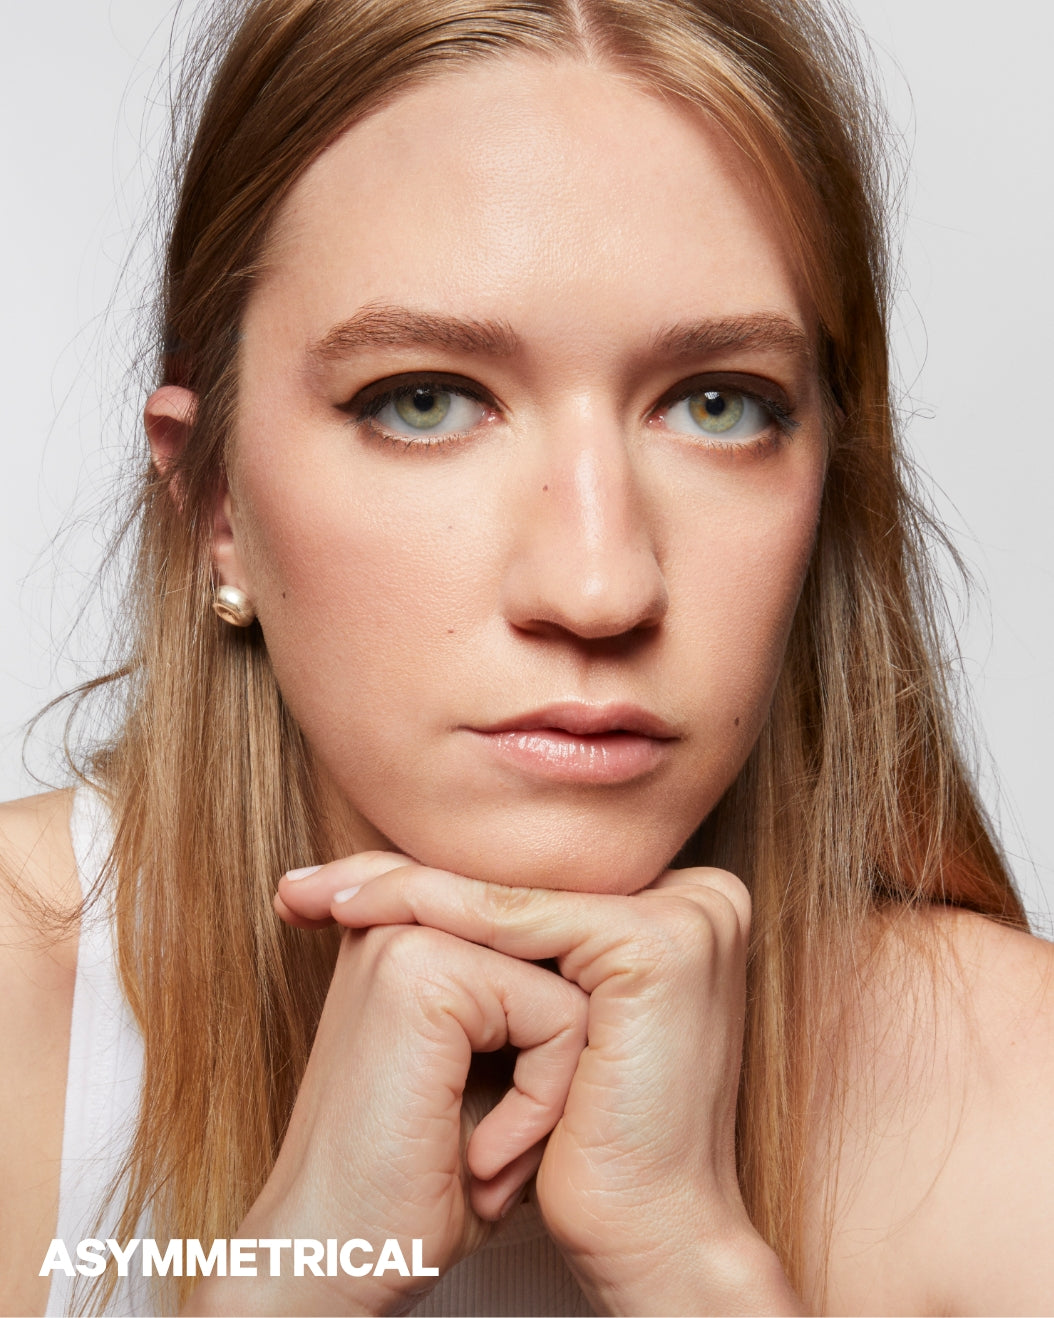 Model with asymmetrical eyes wears winged eyeliner on a white background